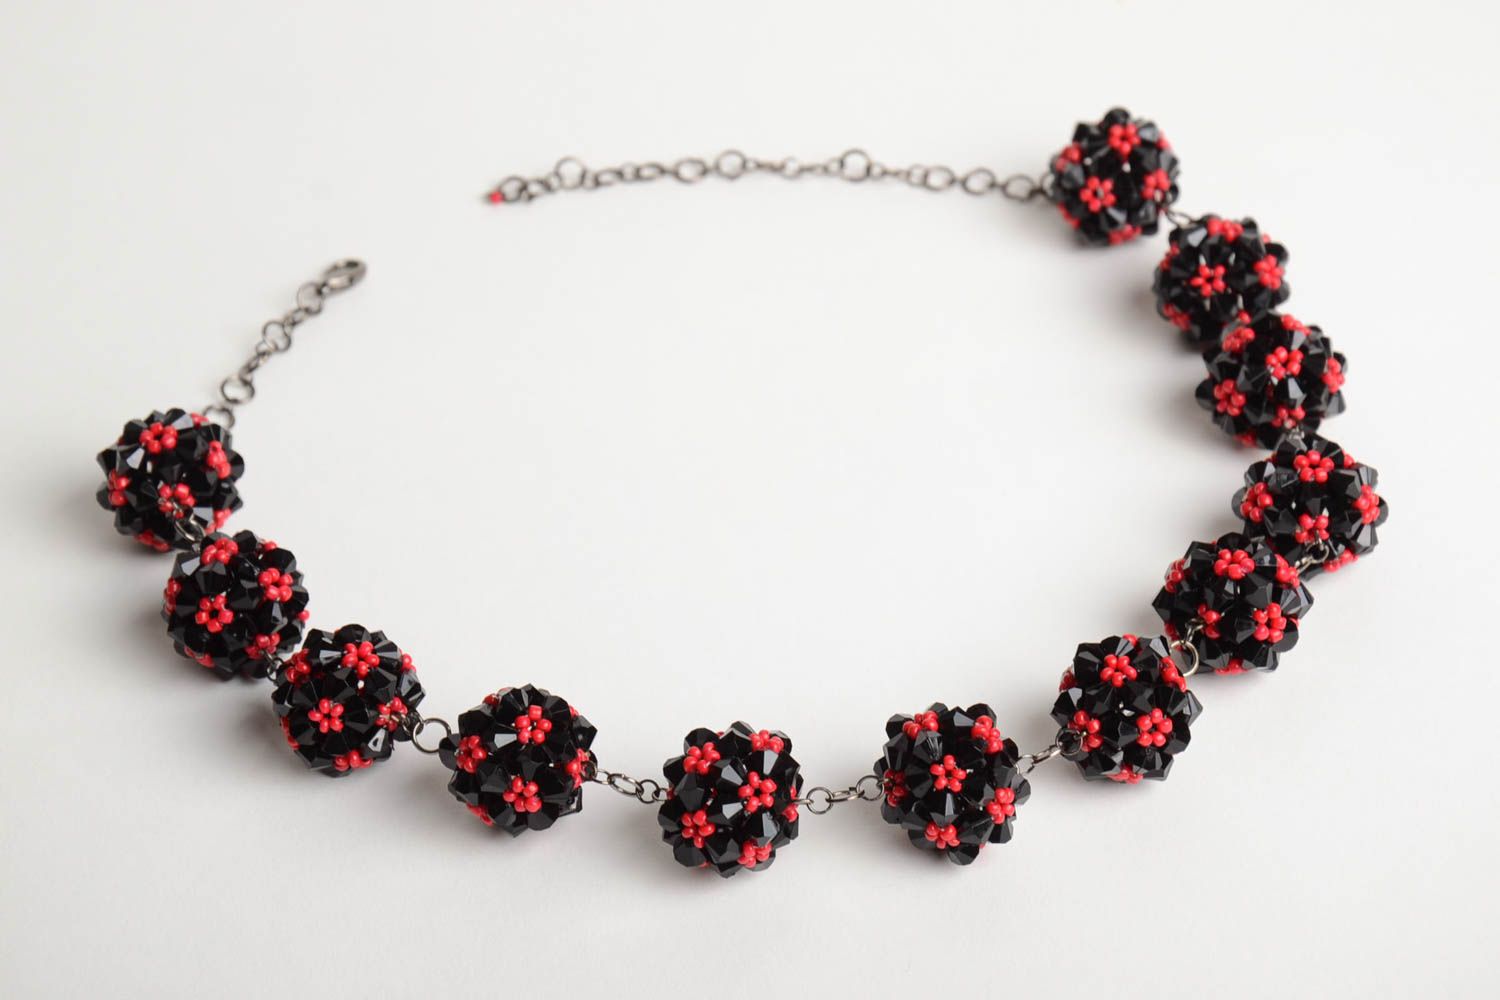 Handmade designer women's necklace crocheted of red and black Czech beads photo 5